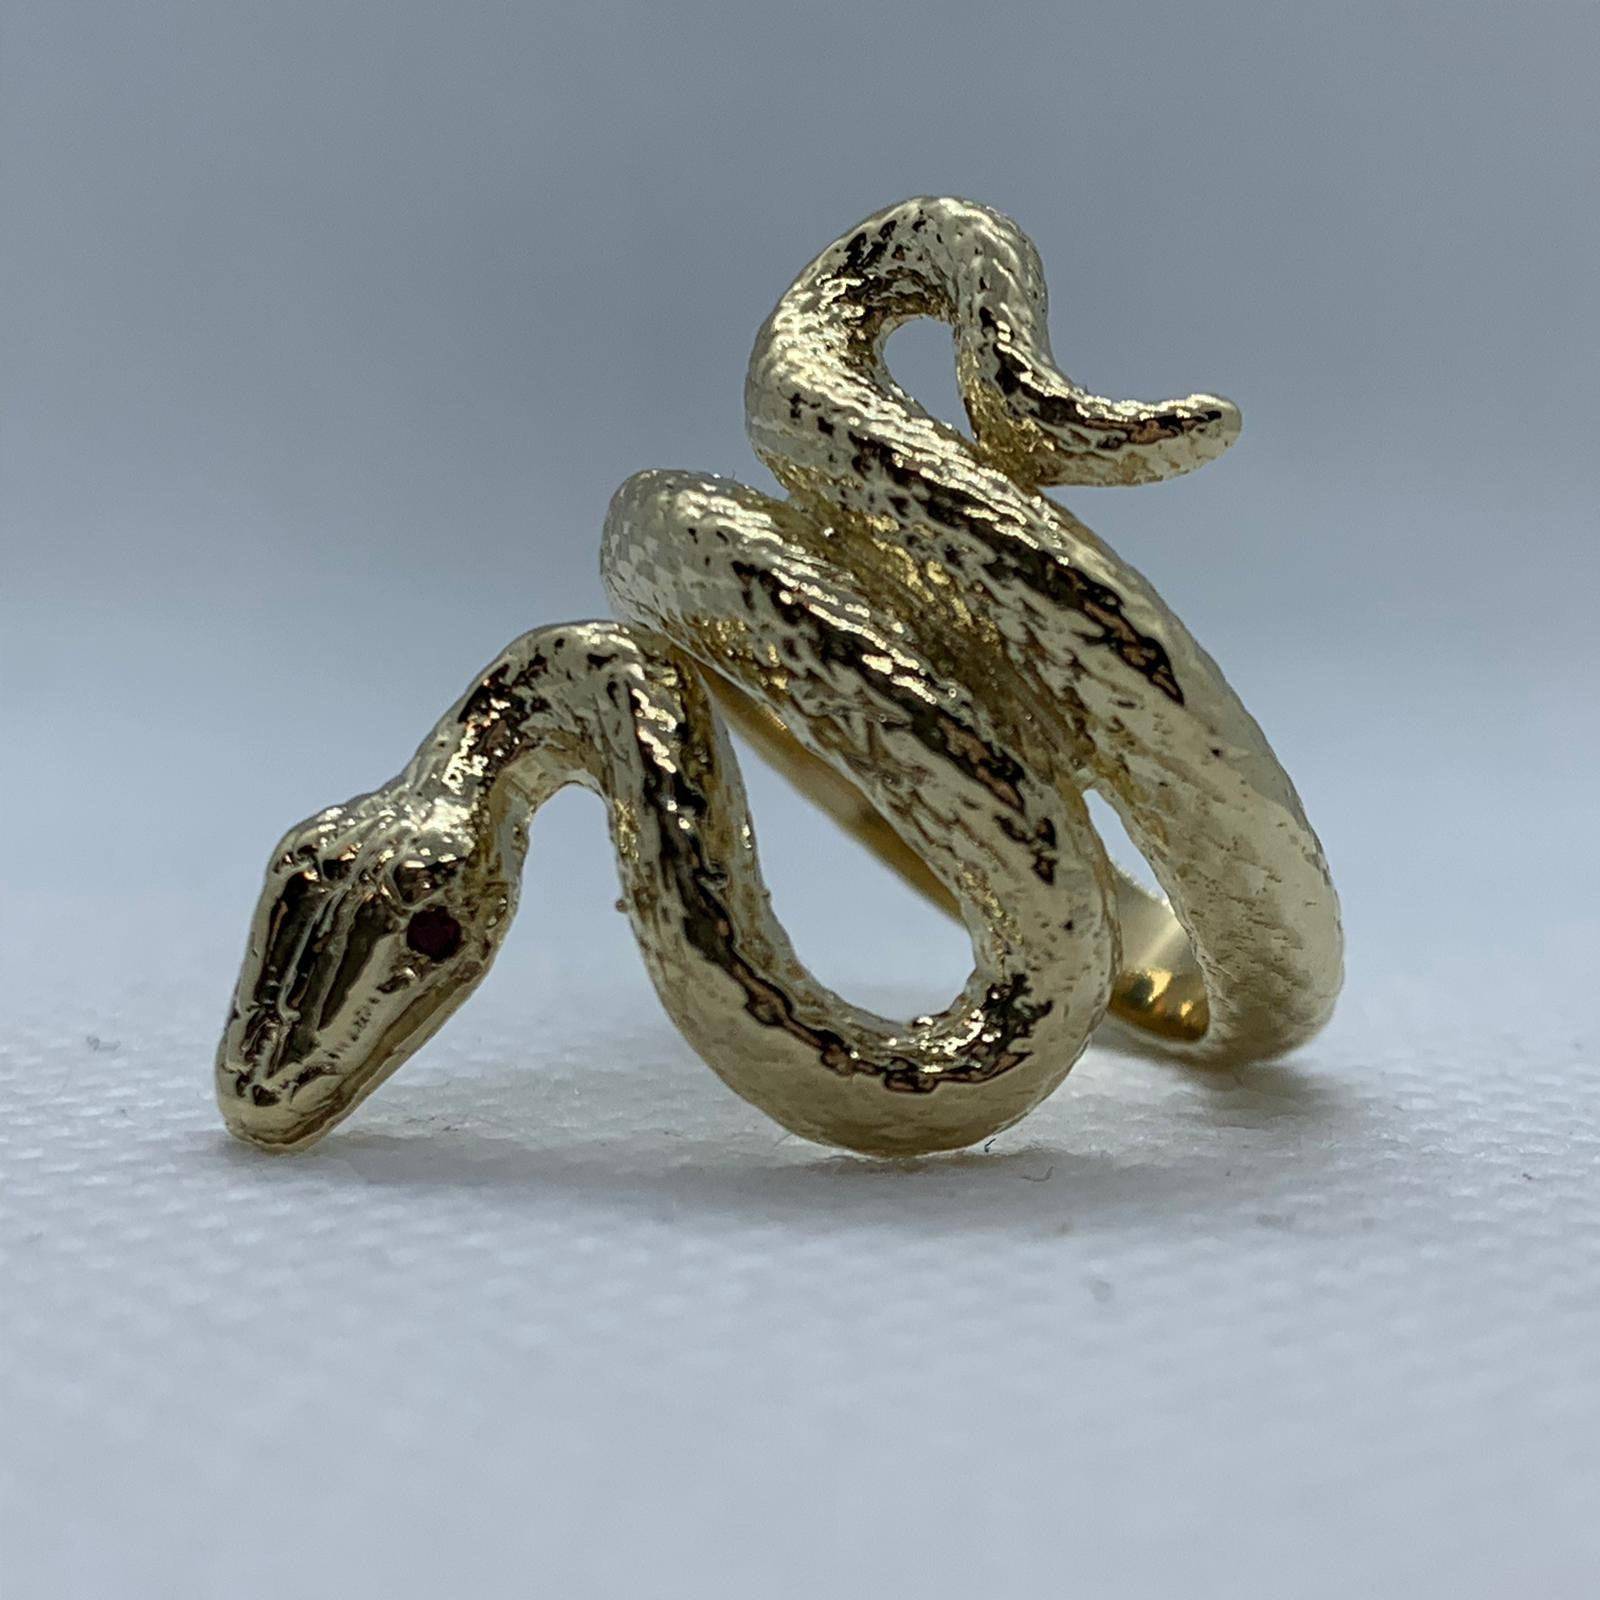 Buy NEXT CREATION Gold Plated Snake Design Adjustable Opening Finger Ring  for Men & Women at Amazon.in